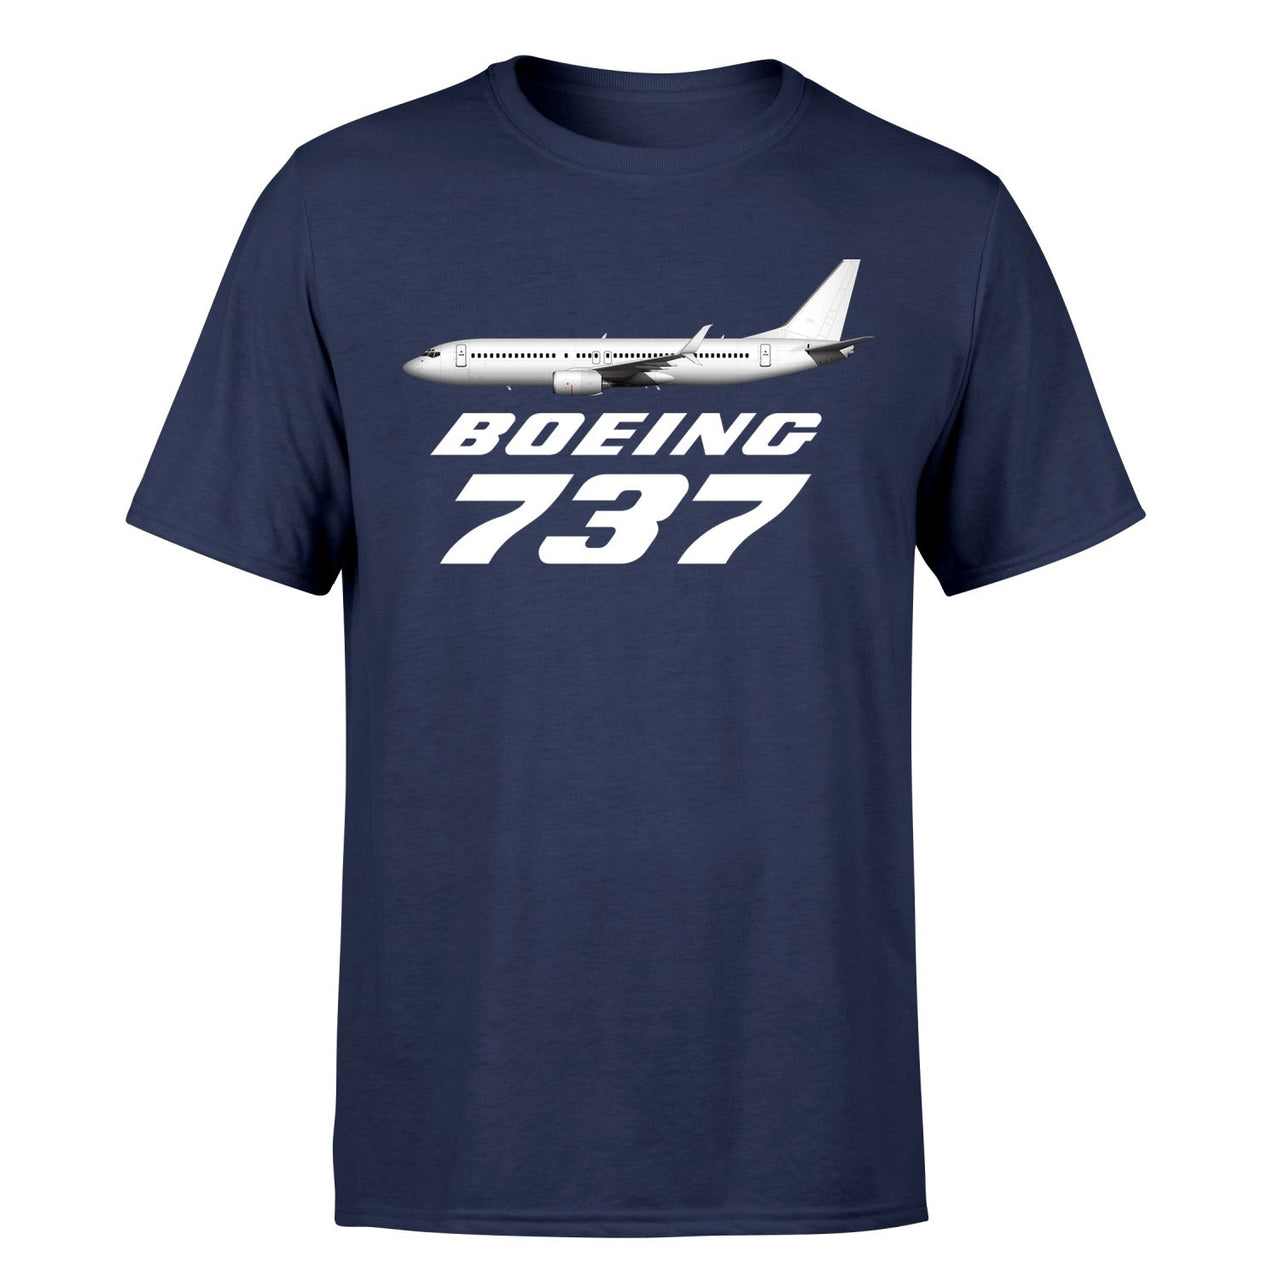 The Boeing 737 Designed T-Shirts